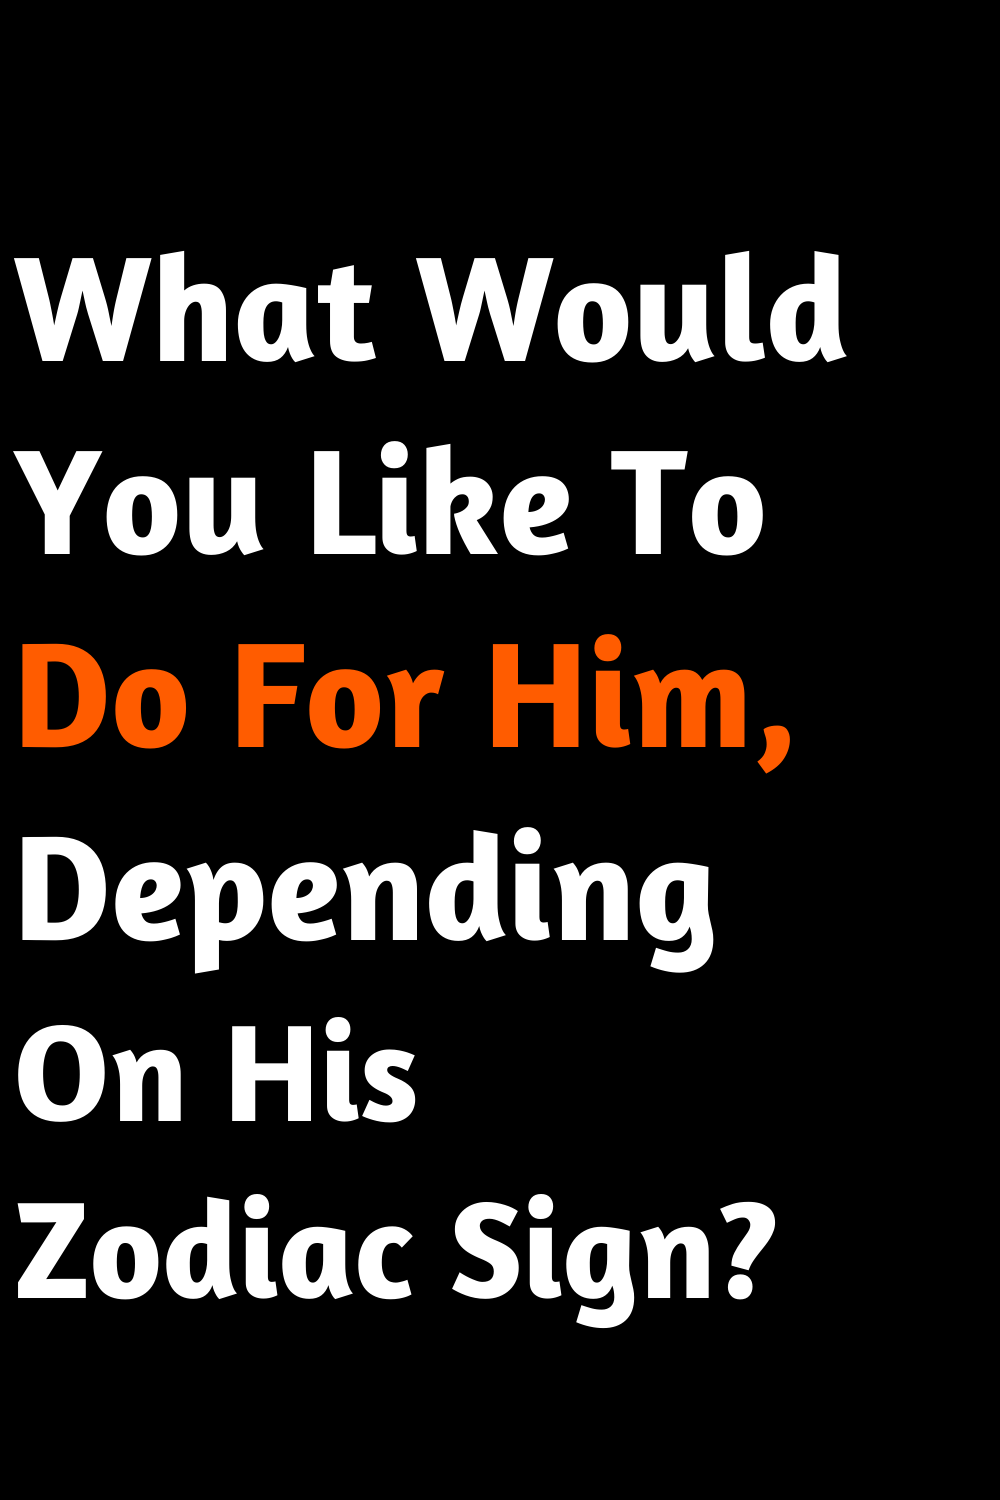 What Would You Like To Do For Him, Depending On His Zodiac Sign?